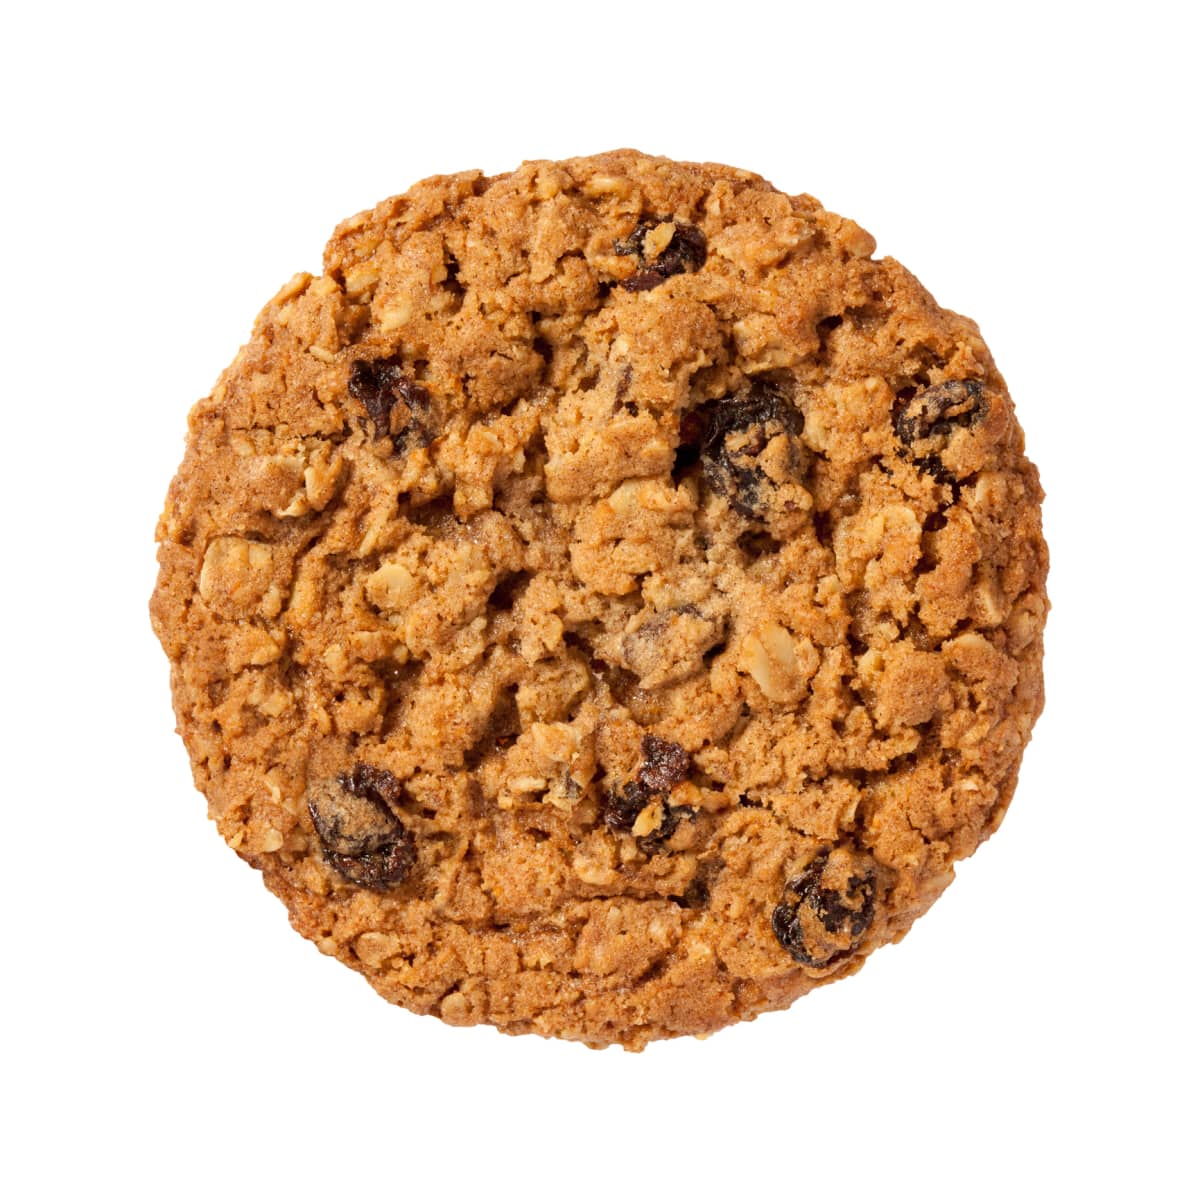 Oatmeal Raisin Cookie isolated on a white background.